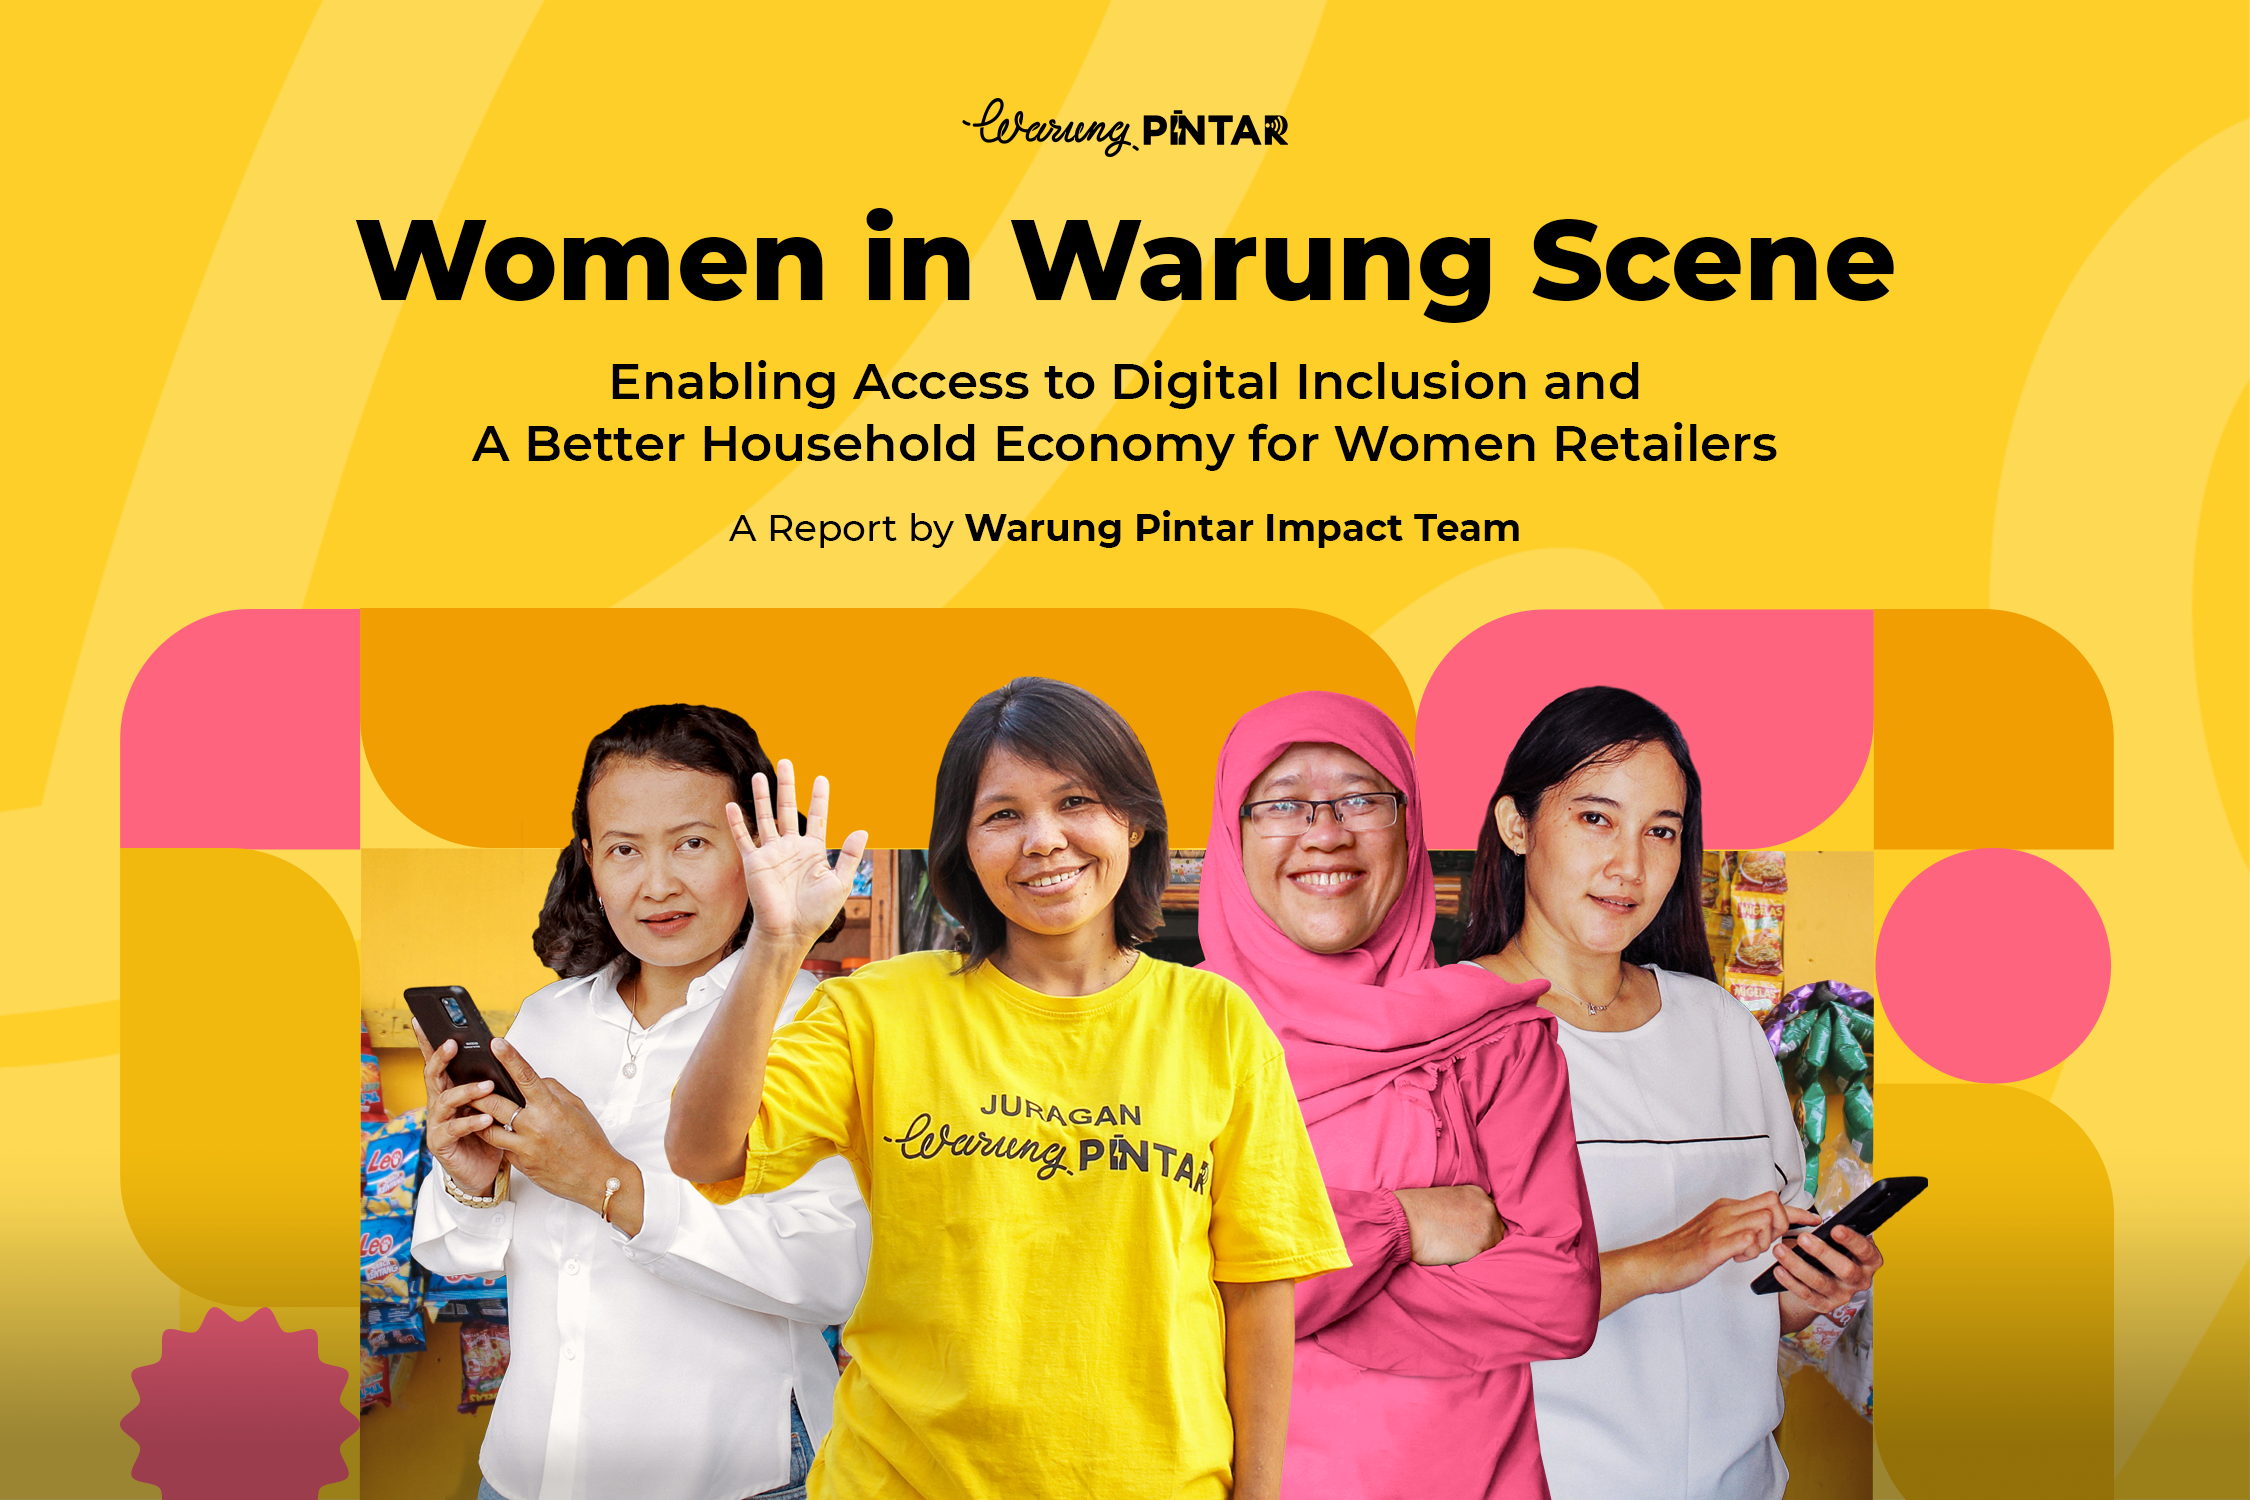 Women in Warung Scene: Enabling Access to Digital Inclusion and A Better Household Economy for Women